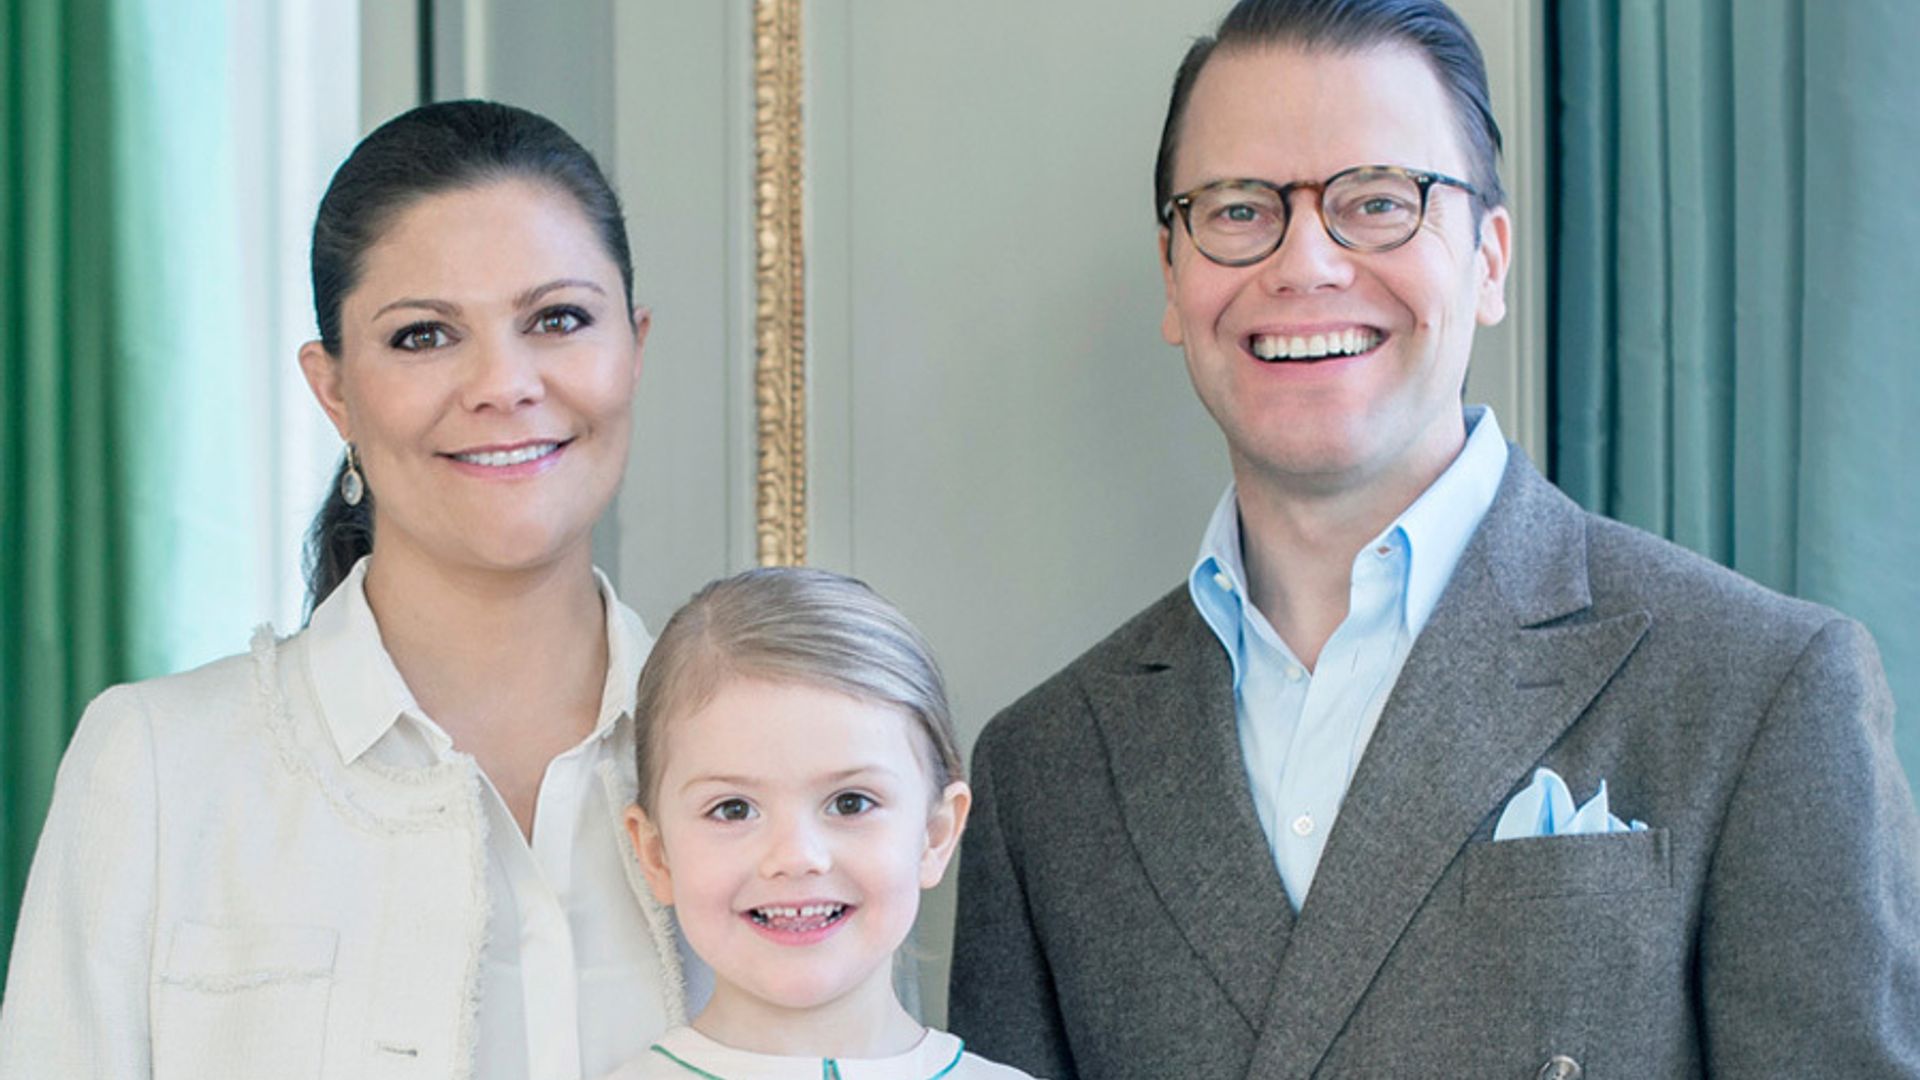 Crown Princess Victoria and Prince Daniel's daughter is a little rocker at the KISS concert